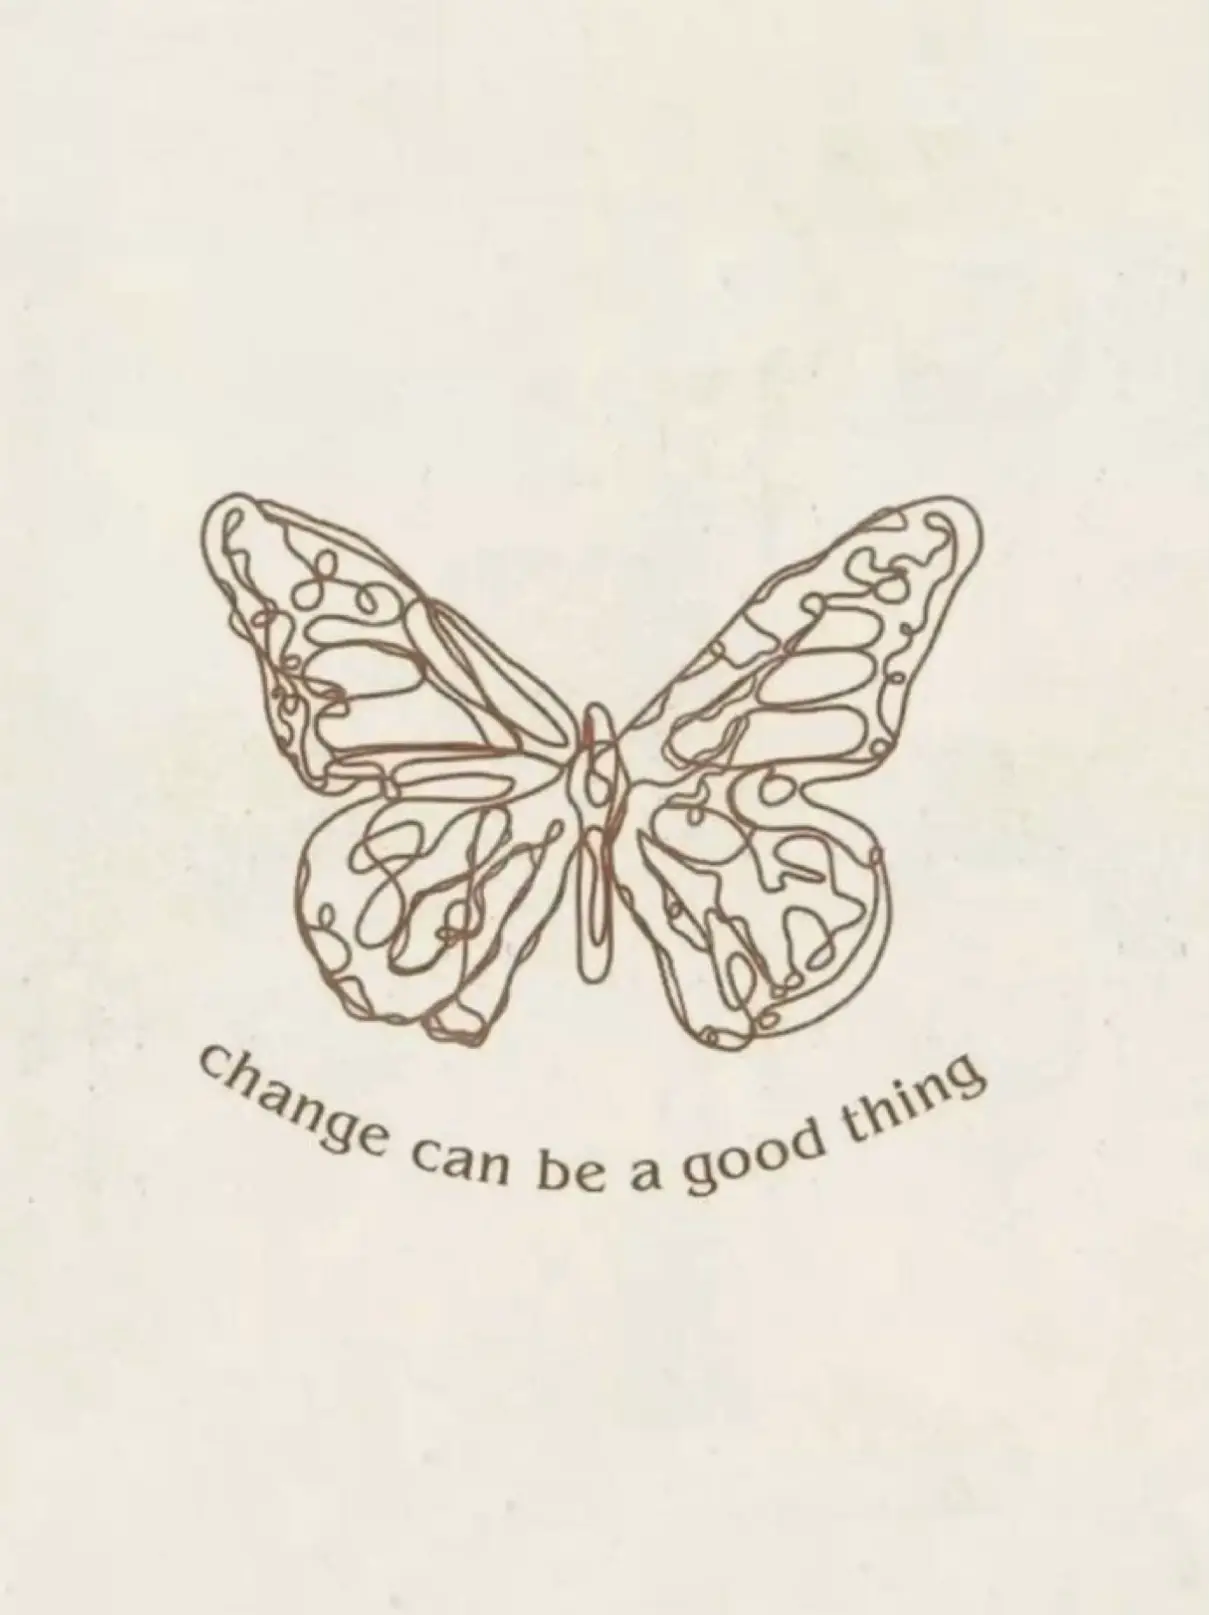  A butterfly with a change can be a good thing logo.